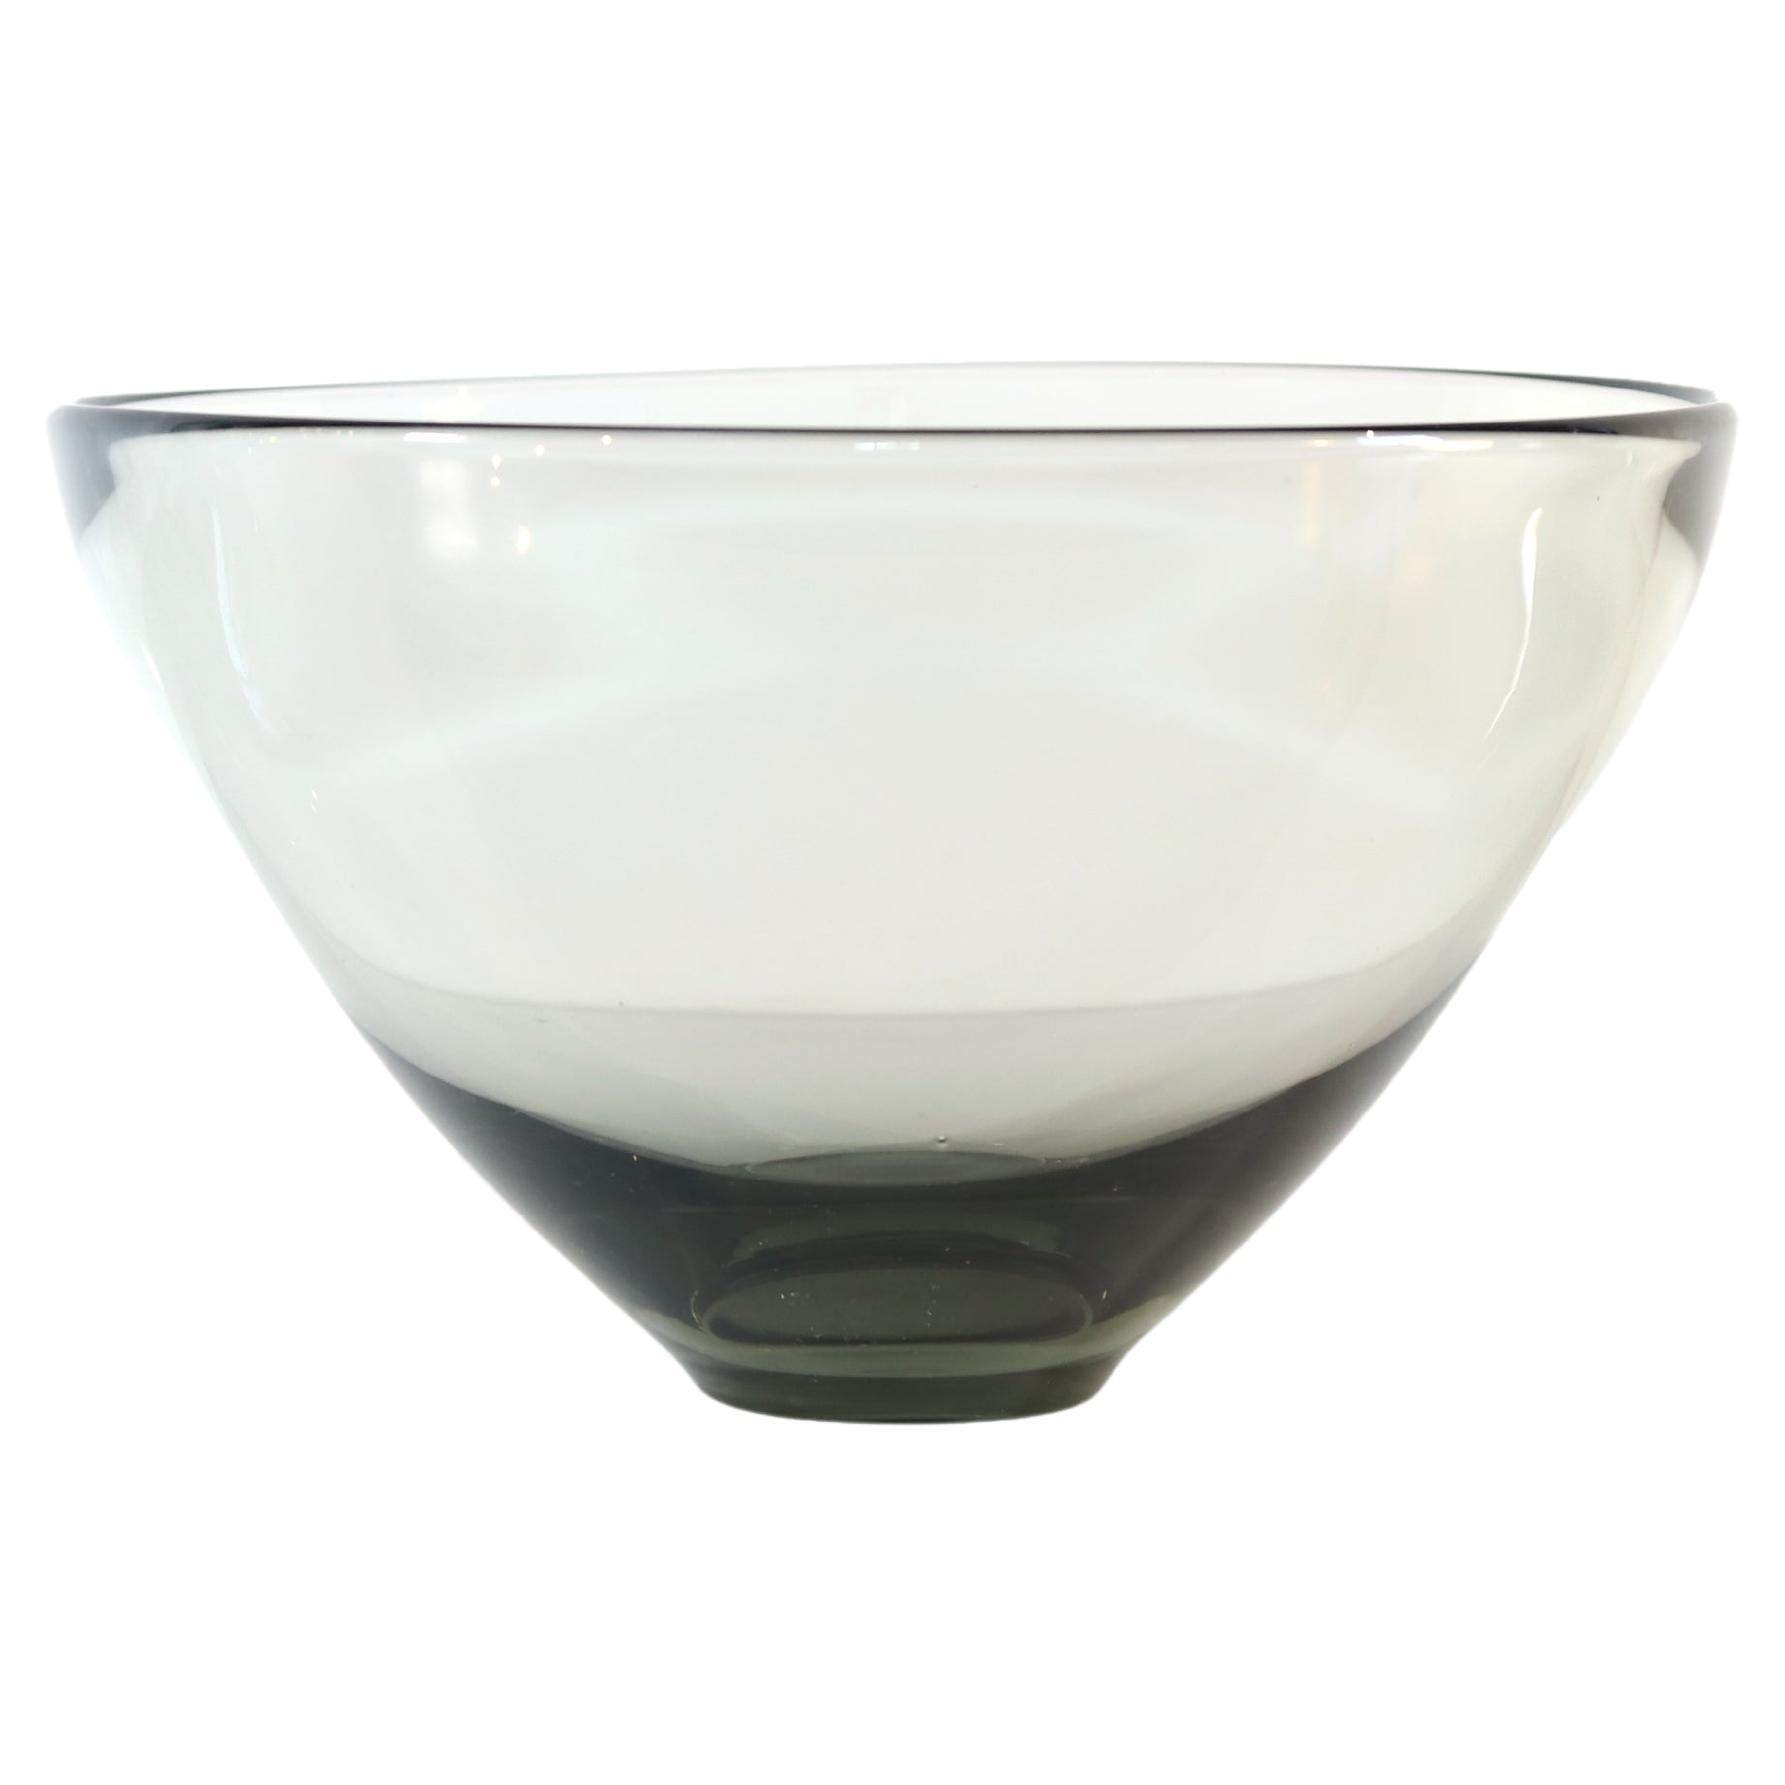 Smoked Glass Bowl by Per Lütken for Holmegaard Model 18504, 1960's For Sale